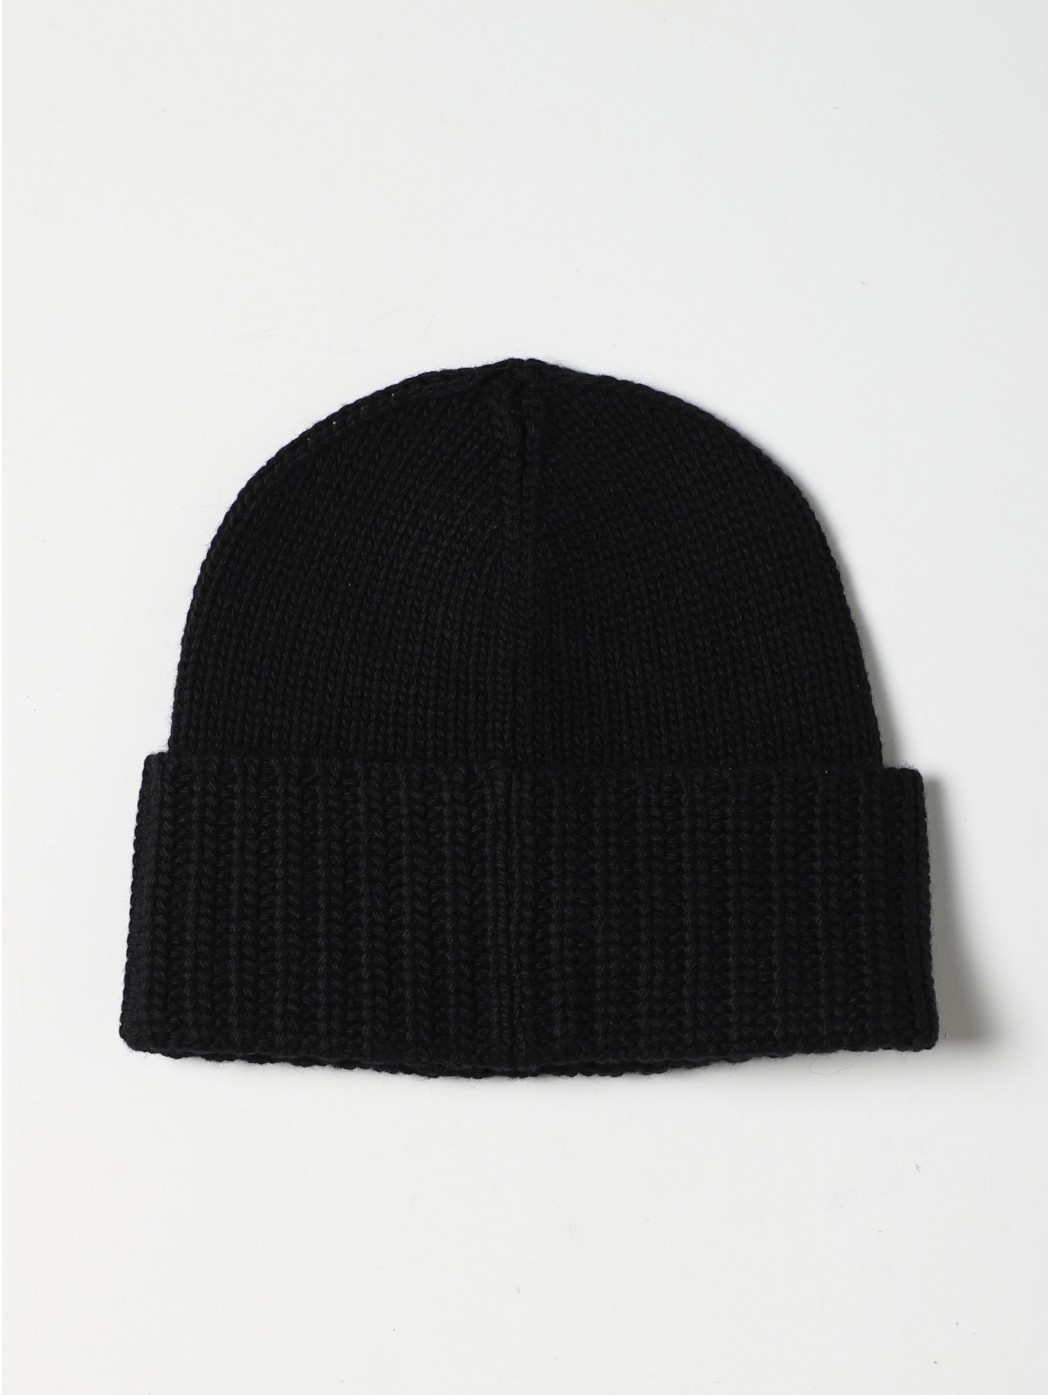 KNIT HAT PATCH IBRA DSQUARED2 KNM009505M05746 M436